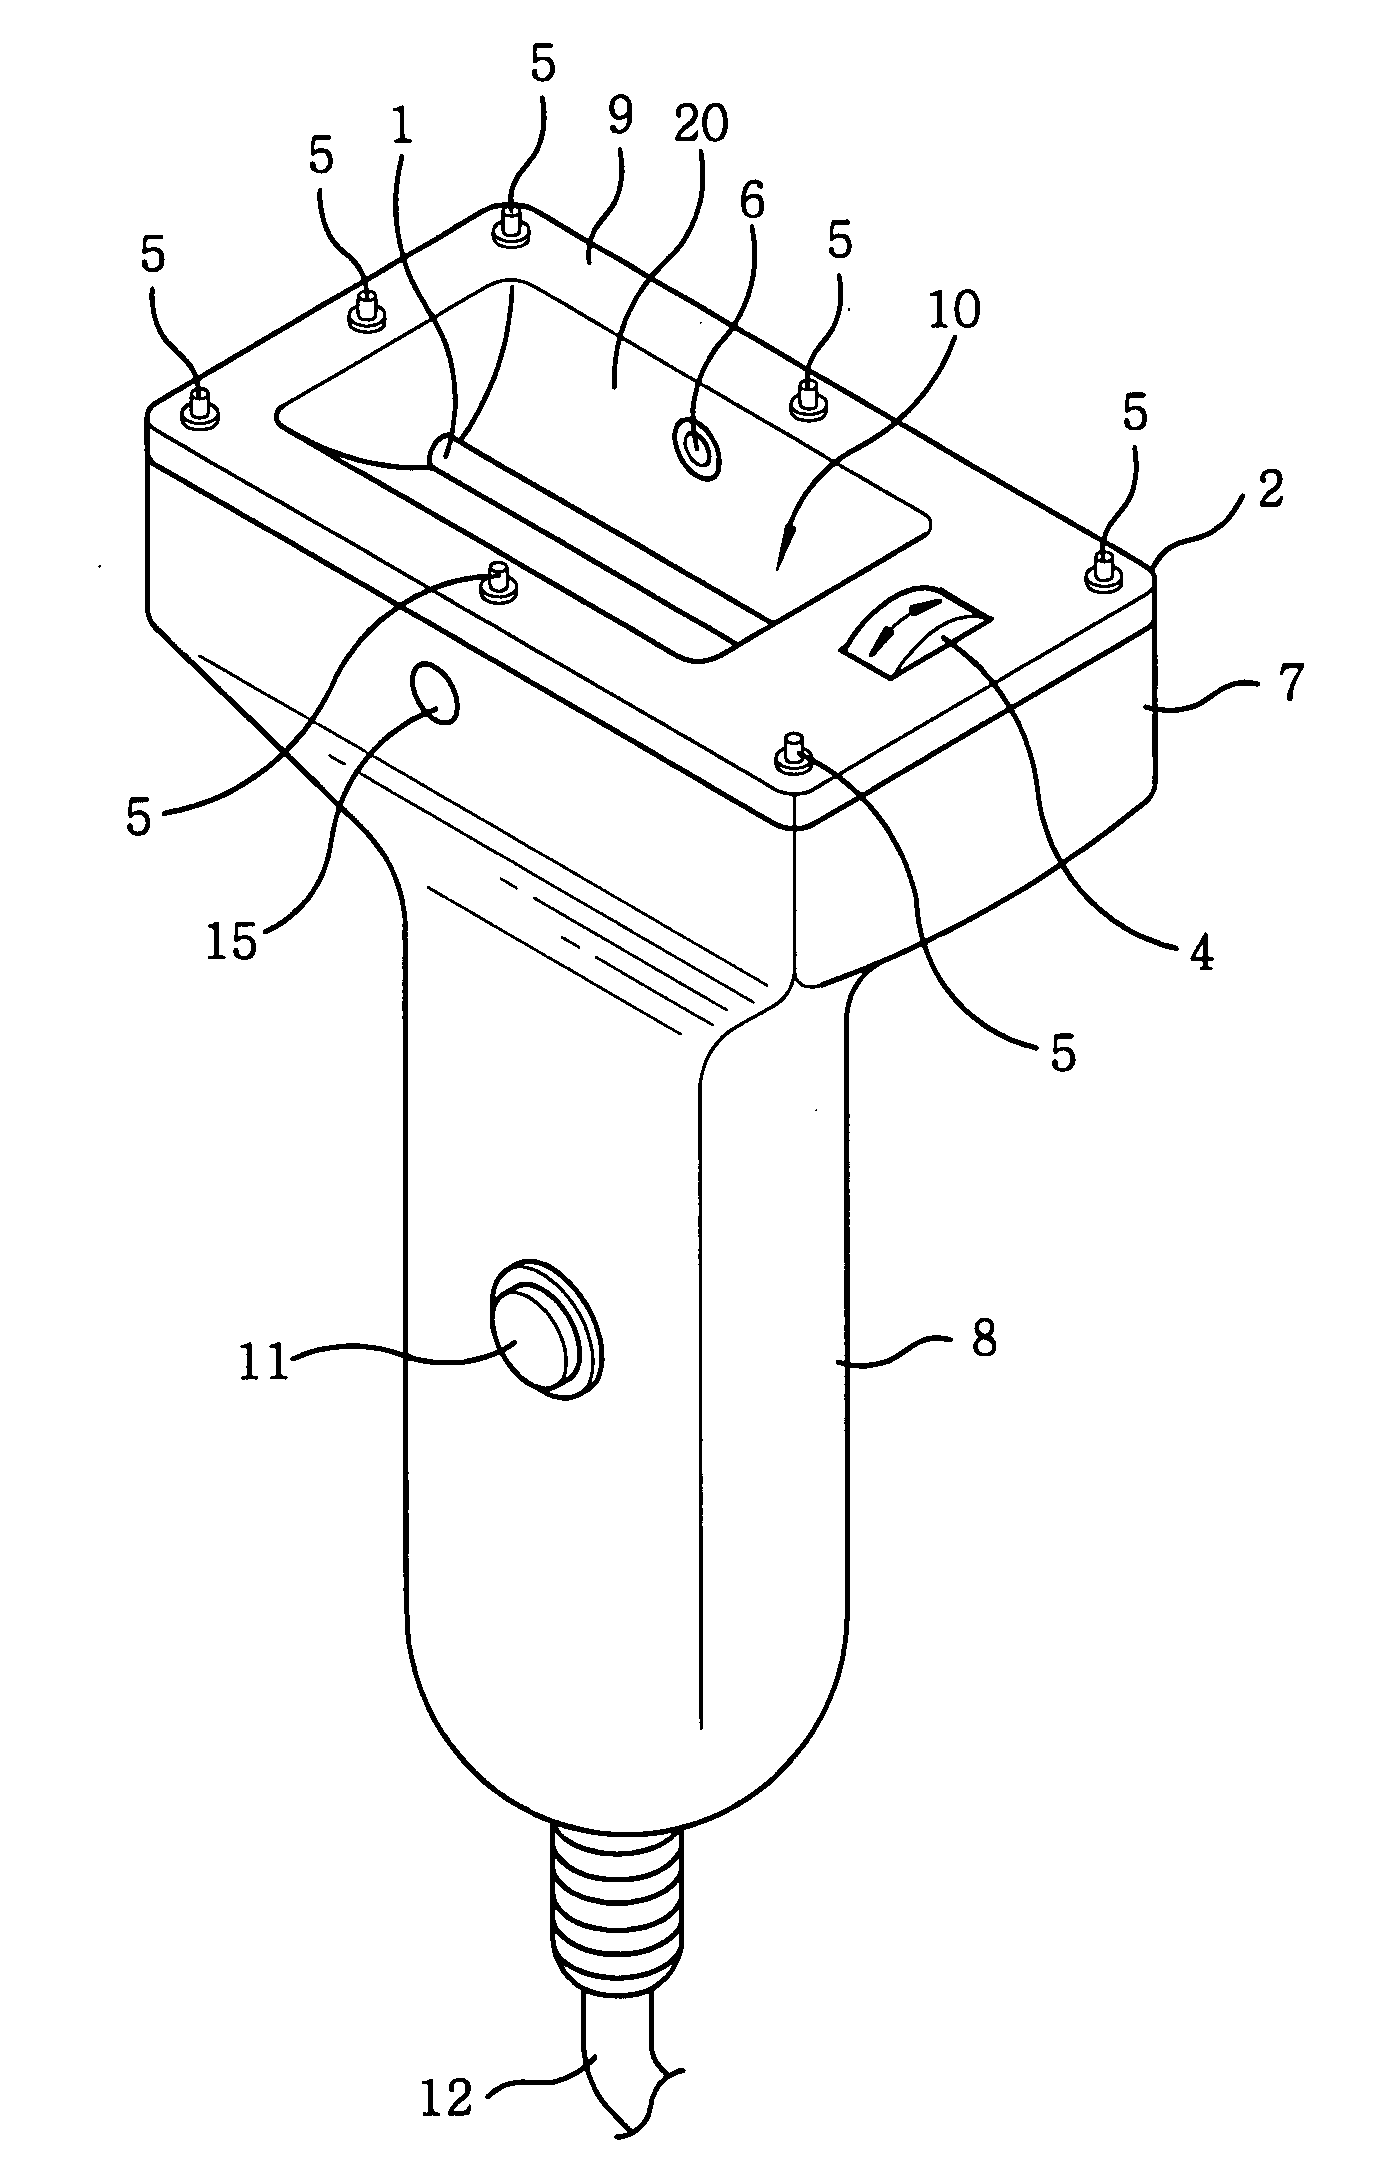 Optical hair removing device